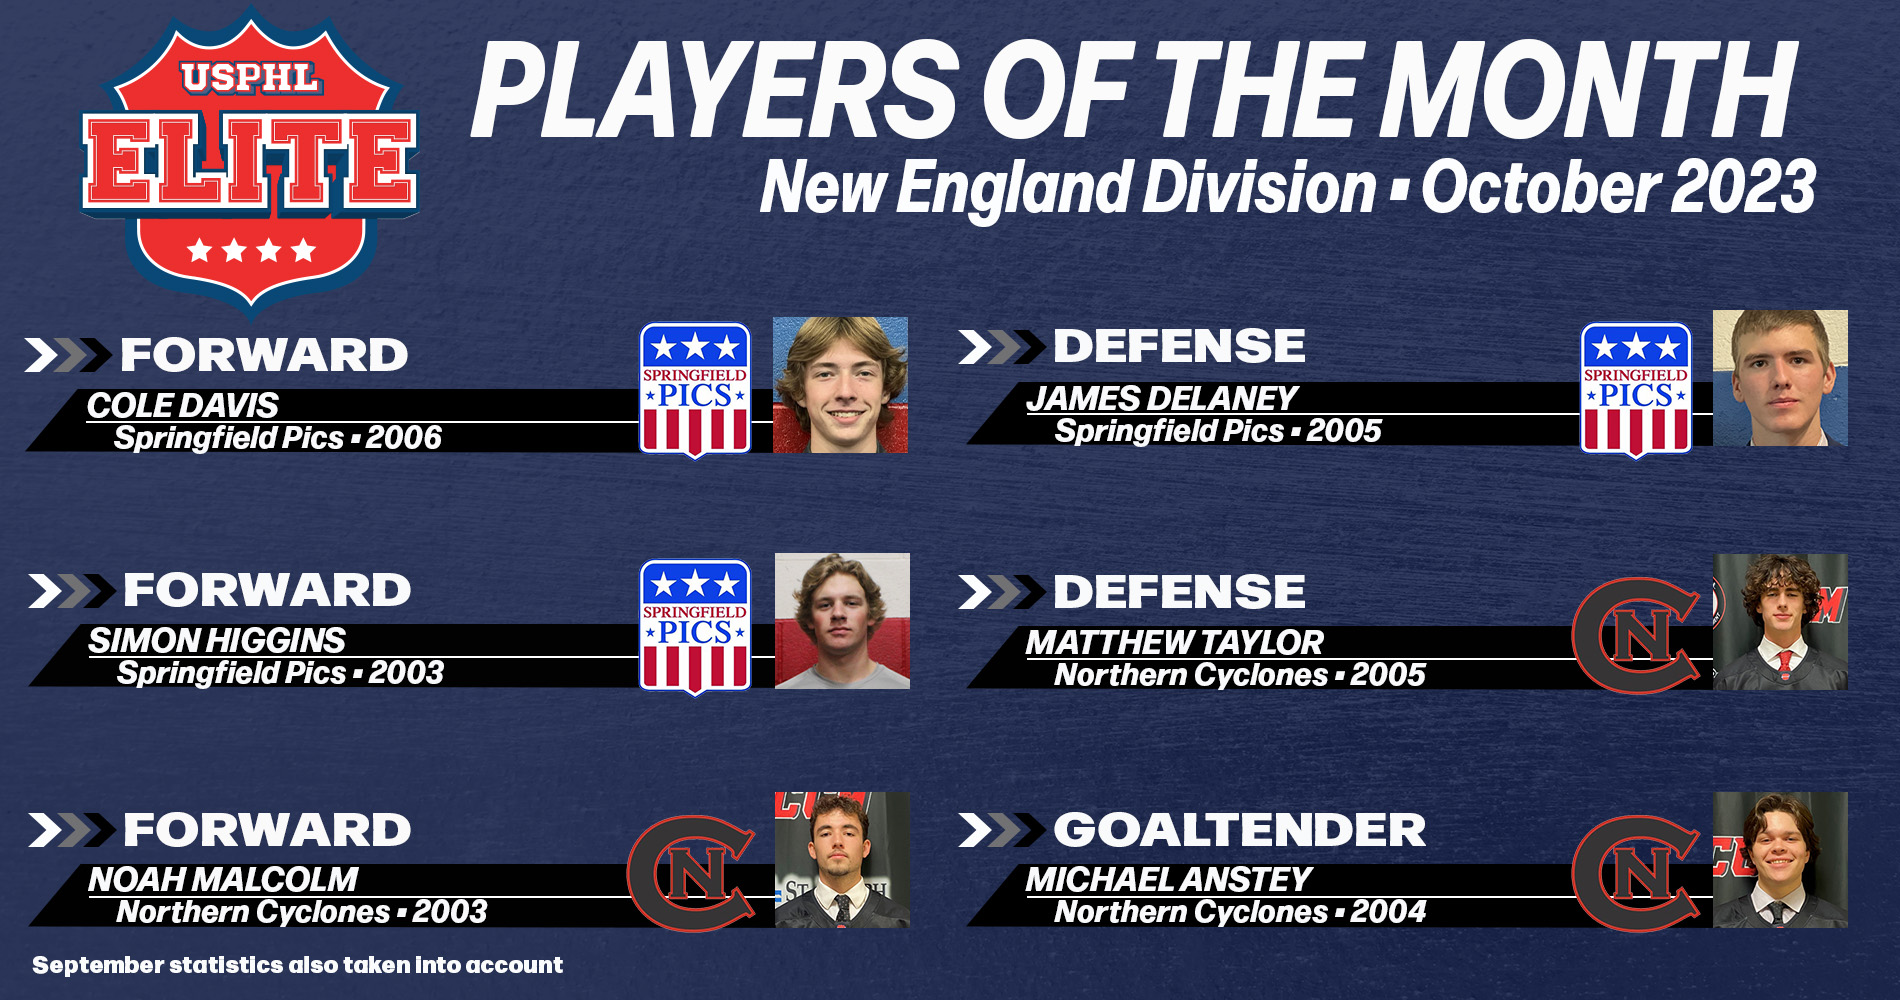 USPHL Elite 2023-24 New England Division Players Of The Month: October 2023